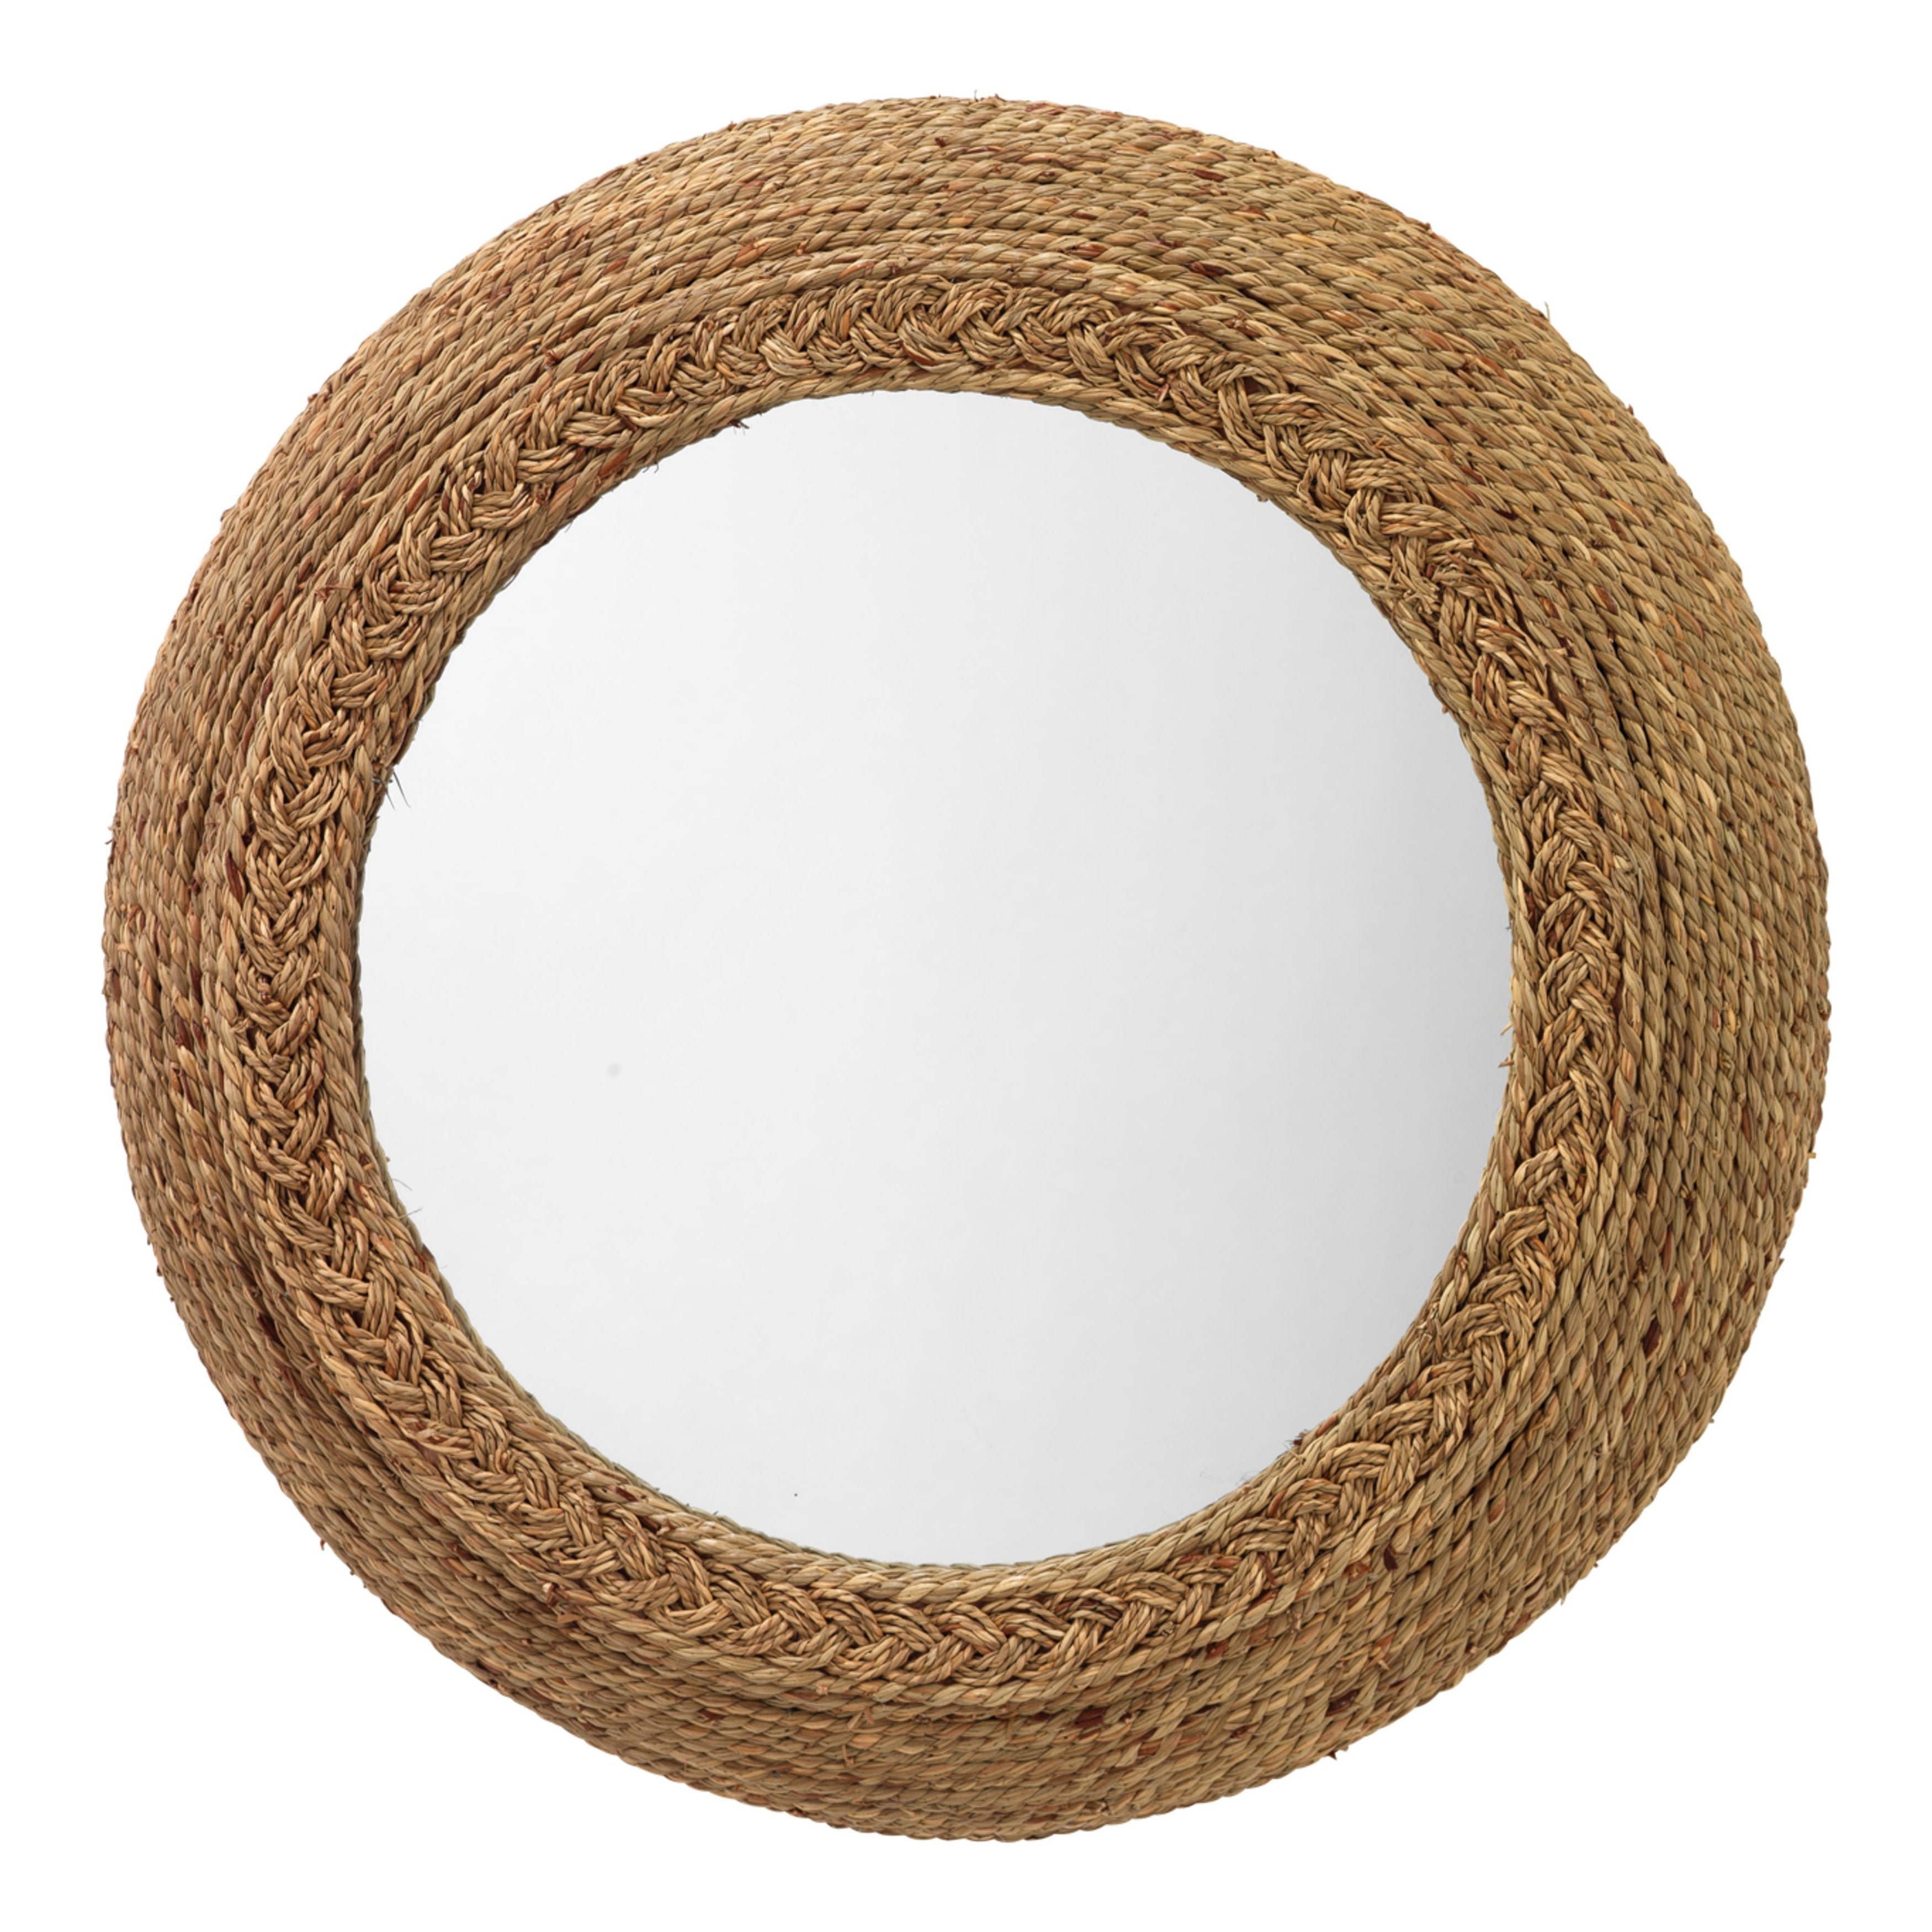 Jamie Young Company - BL616-M28 - Seagrass Mirror -  - Natural